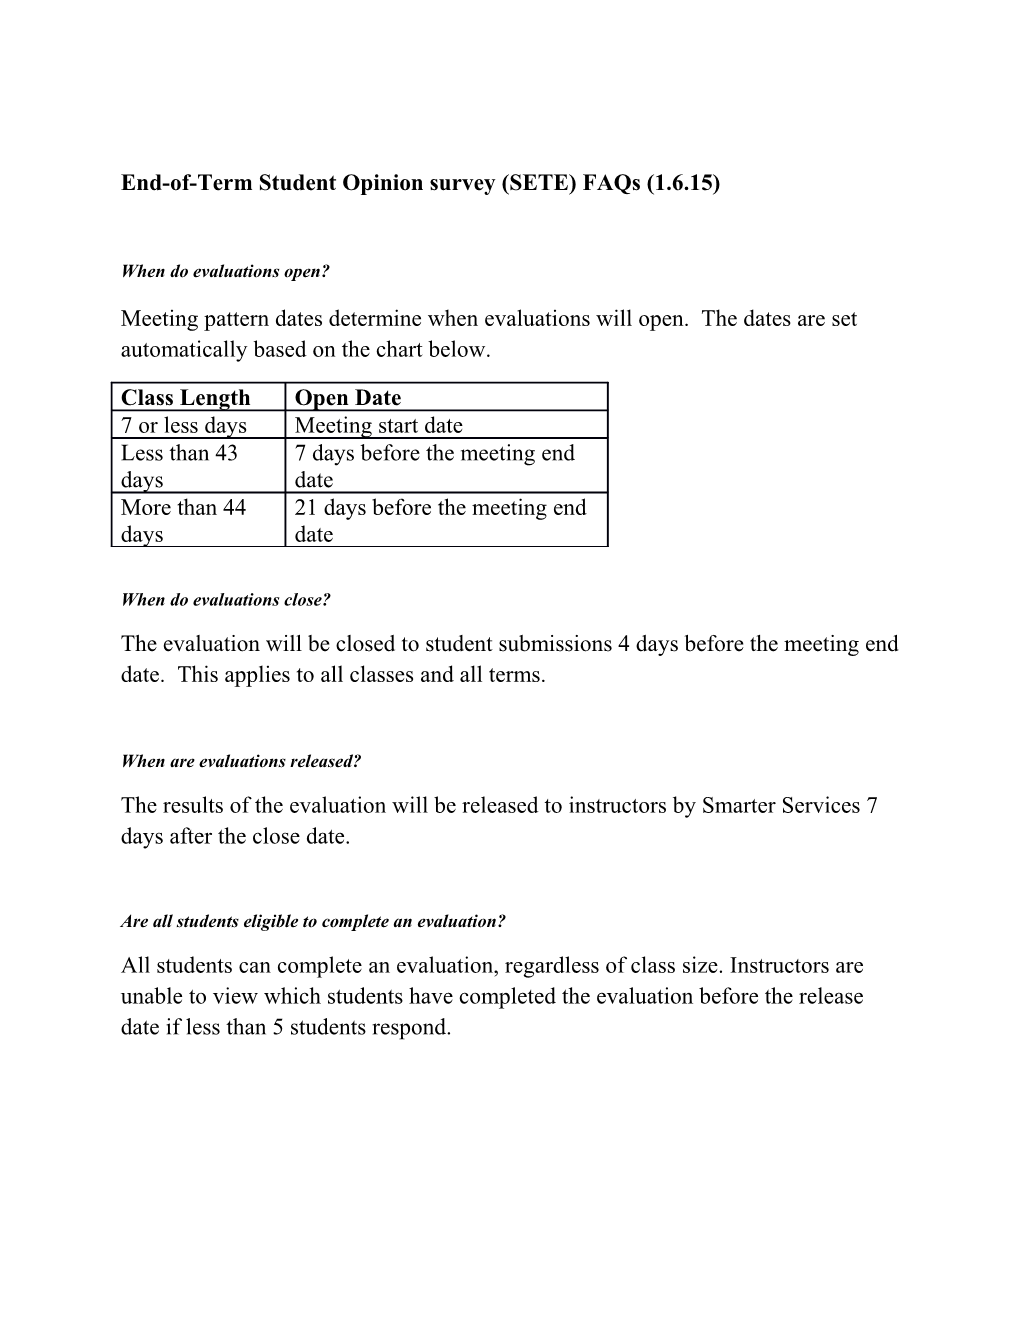 End-Of-Term Student Opinion Survey(SETE) Faqs (1.6.15)